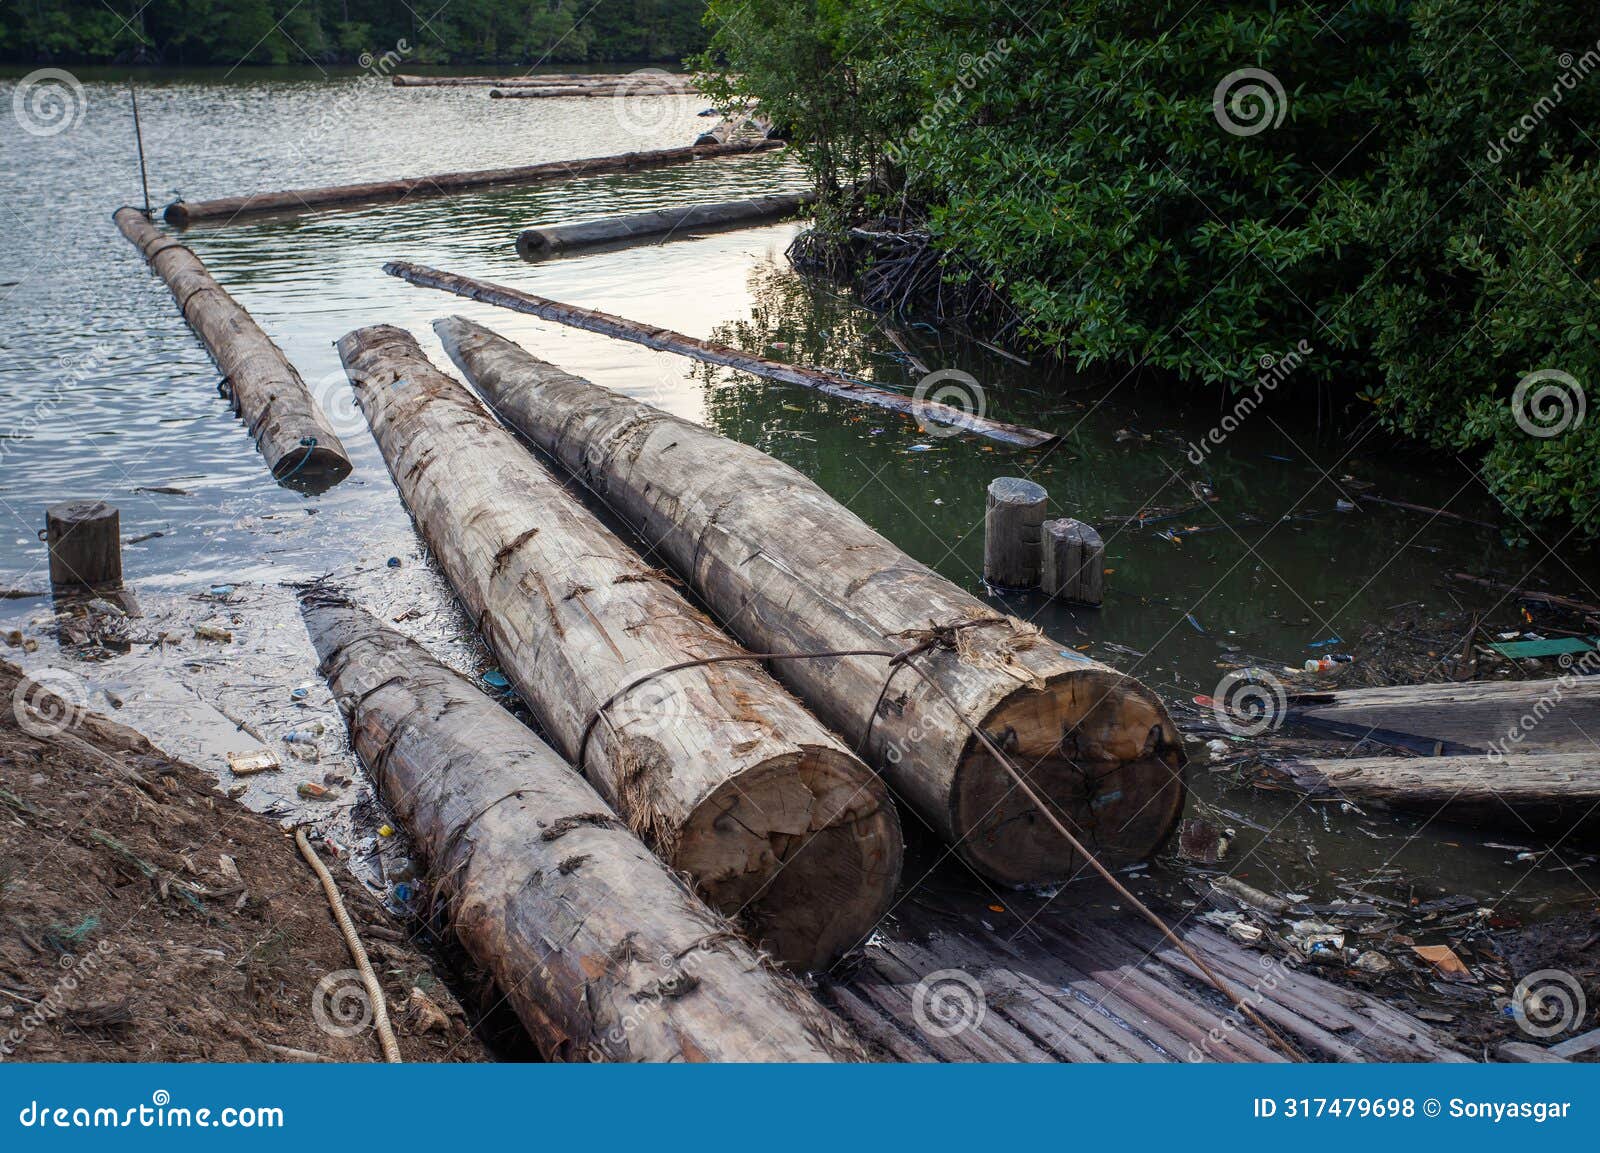 the harvested logs from the forest are sent via river to a cutting factory in balikpapan, east kalimantan indonesia